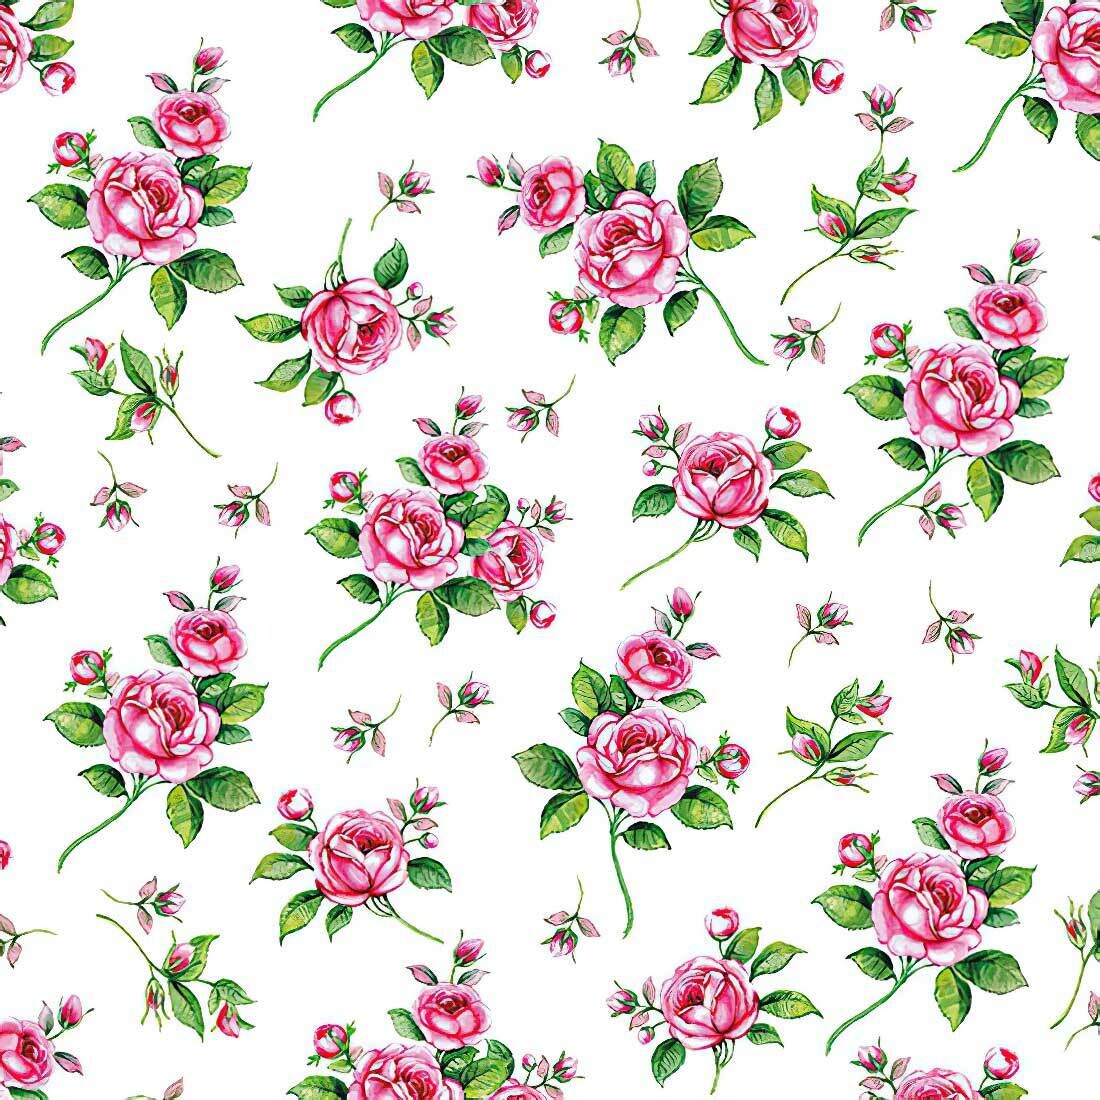 Decoupage Paper Napkins - Floral - Evelyn White Rose (1 Sheet) Out of Stock